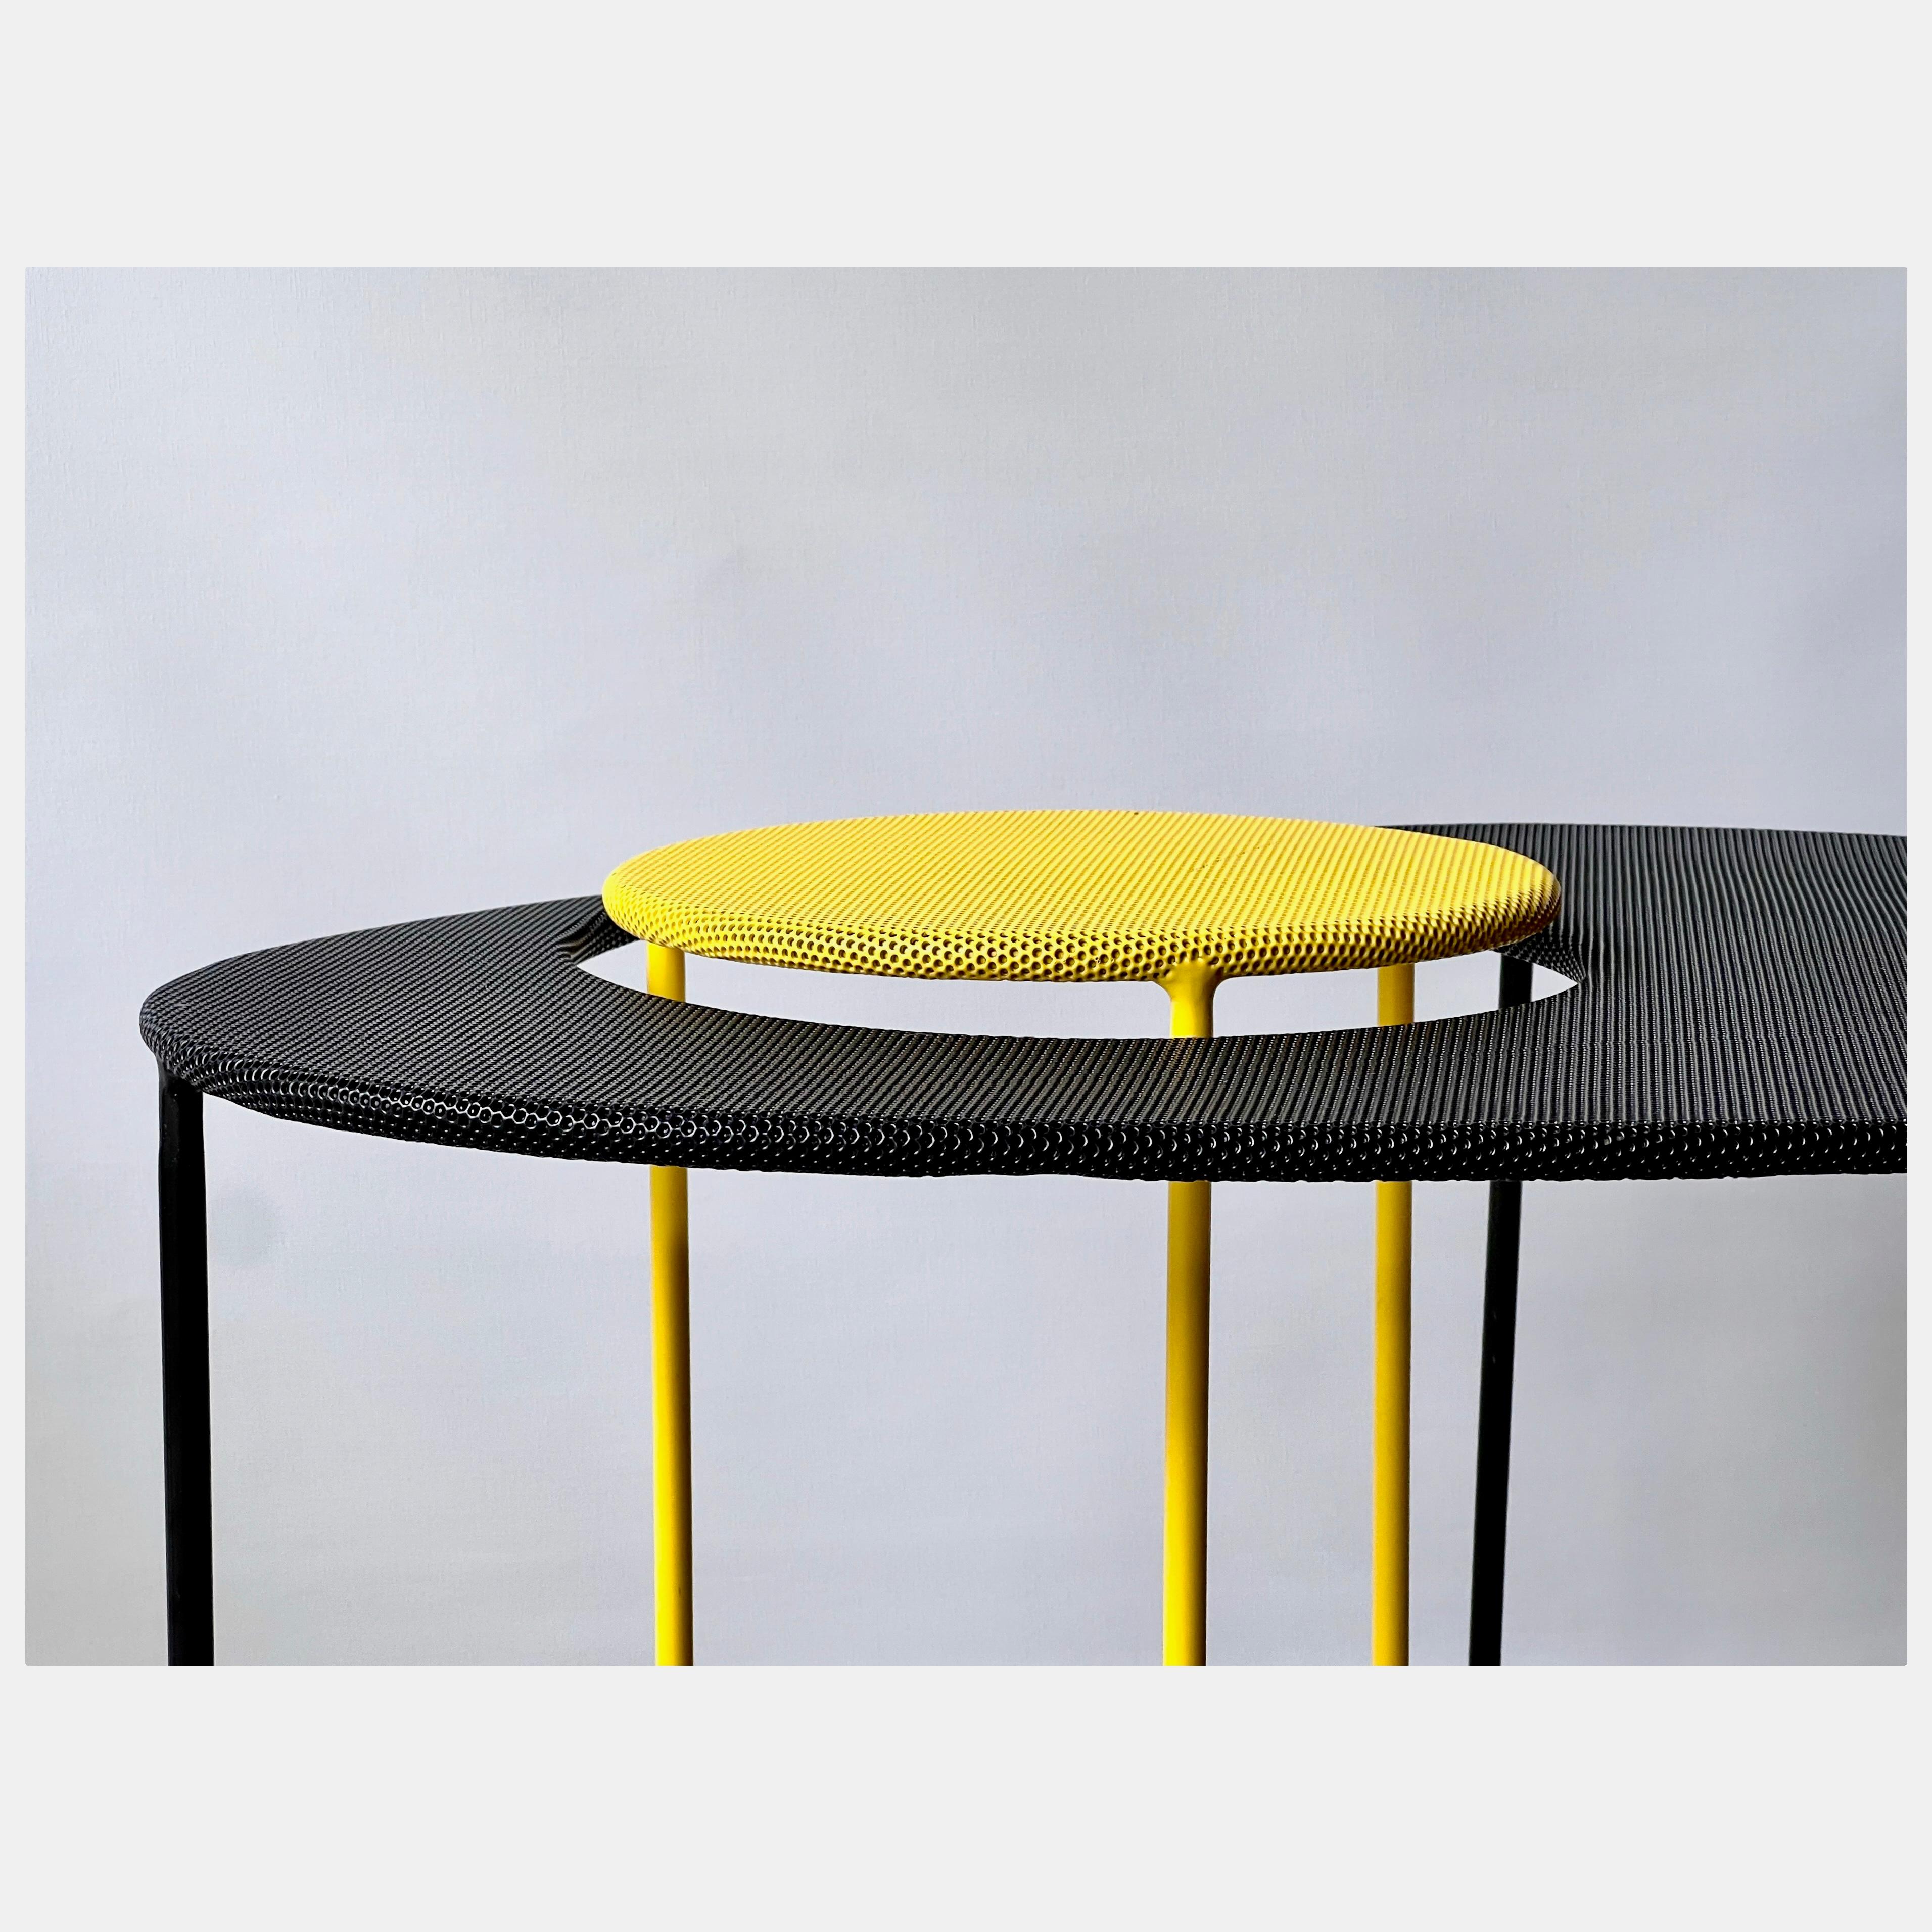 Nesting tables, model Kangourou, designed by Mathieu Matégot.
The design dates to 1954. It is made from powder coated performed aluminium, a technique that Matégot invented a few years earlier and named it Rigitulle and became his trademark.
Reissue